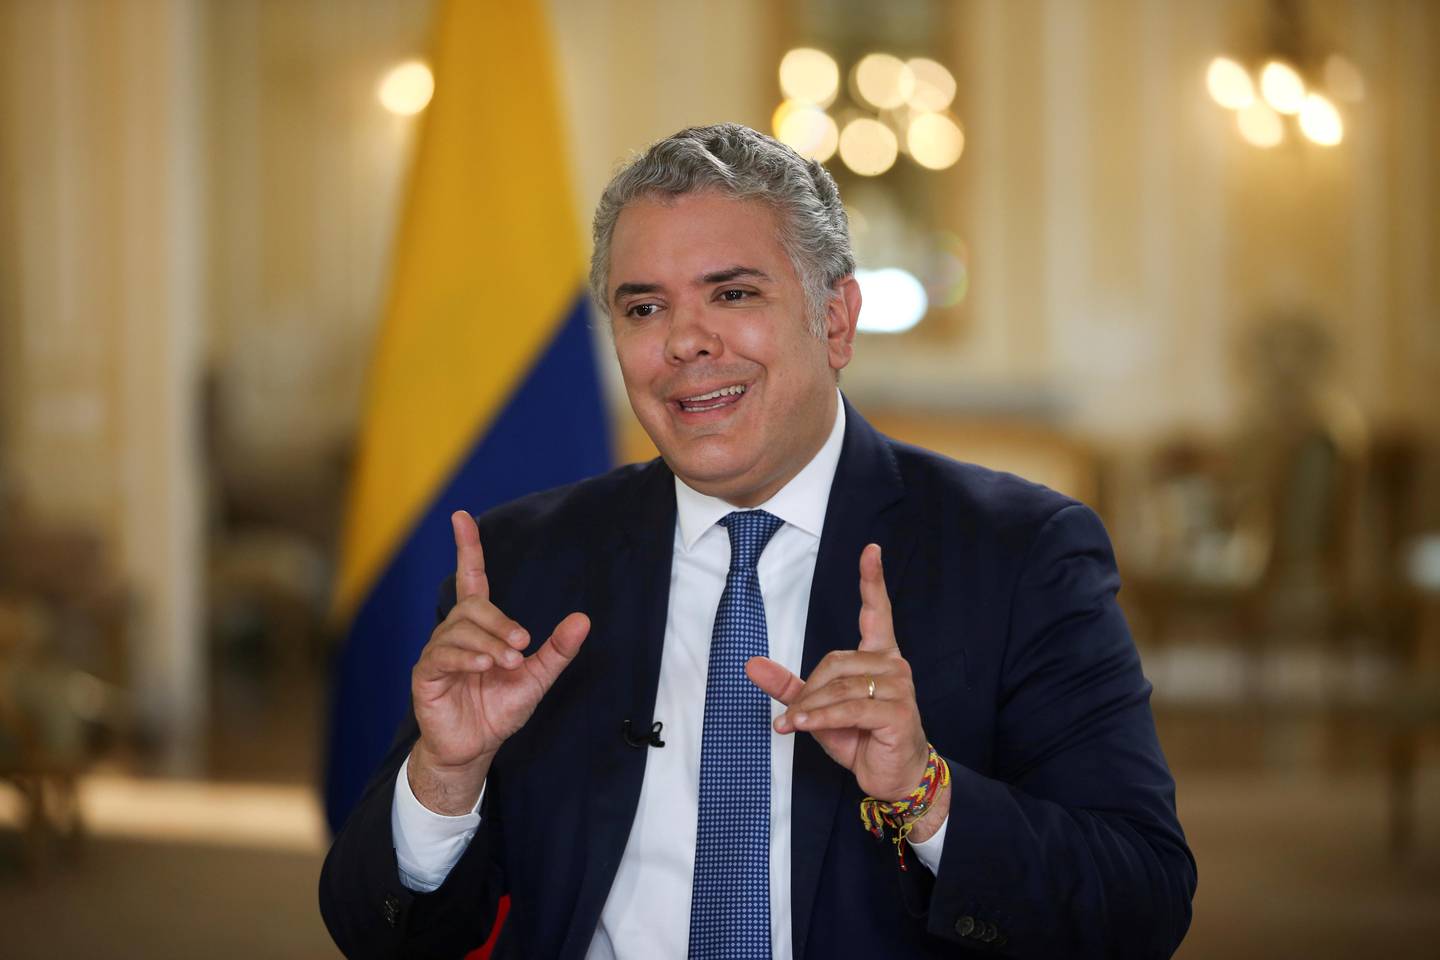 FILE PHOTO: Colombia's President Ivan Duque speaks during an interview with Reuters in Bogota, Colombia October 16, 2020. Picture taken October 16, 2020. REUTERS/Luisa Gonzalez/File Photo